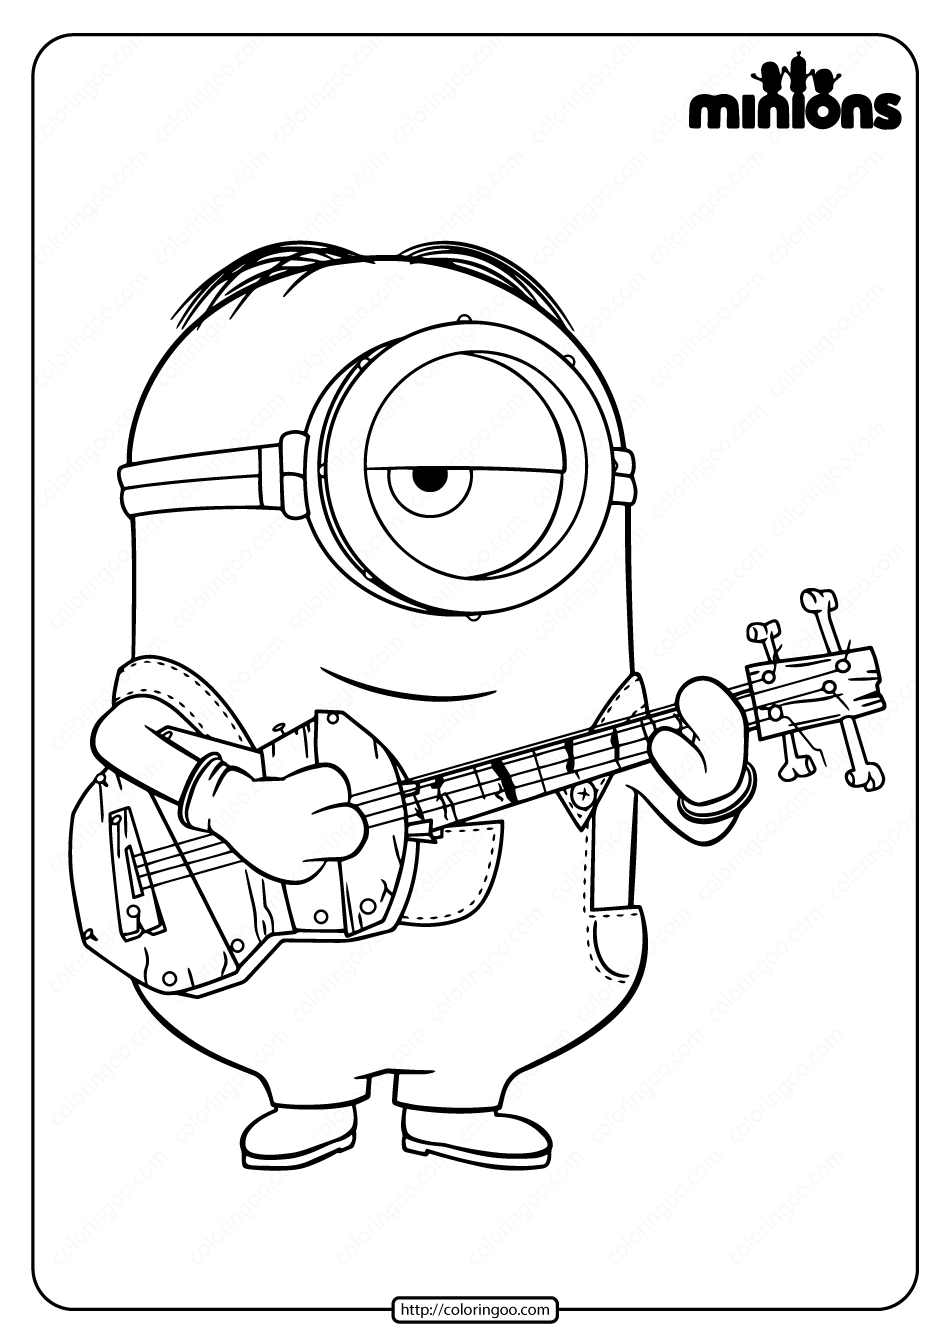 Printable Minions Play The Guitar Coloring Page